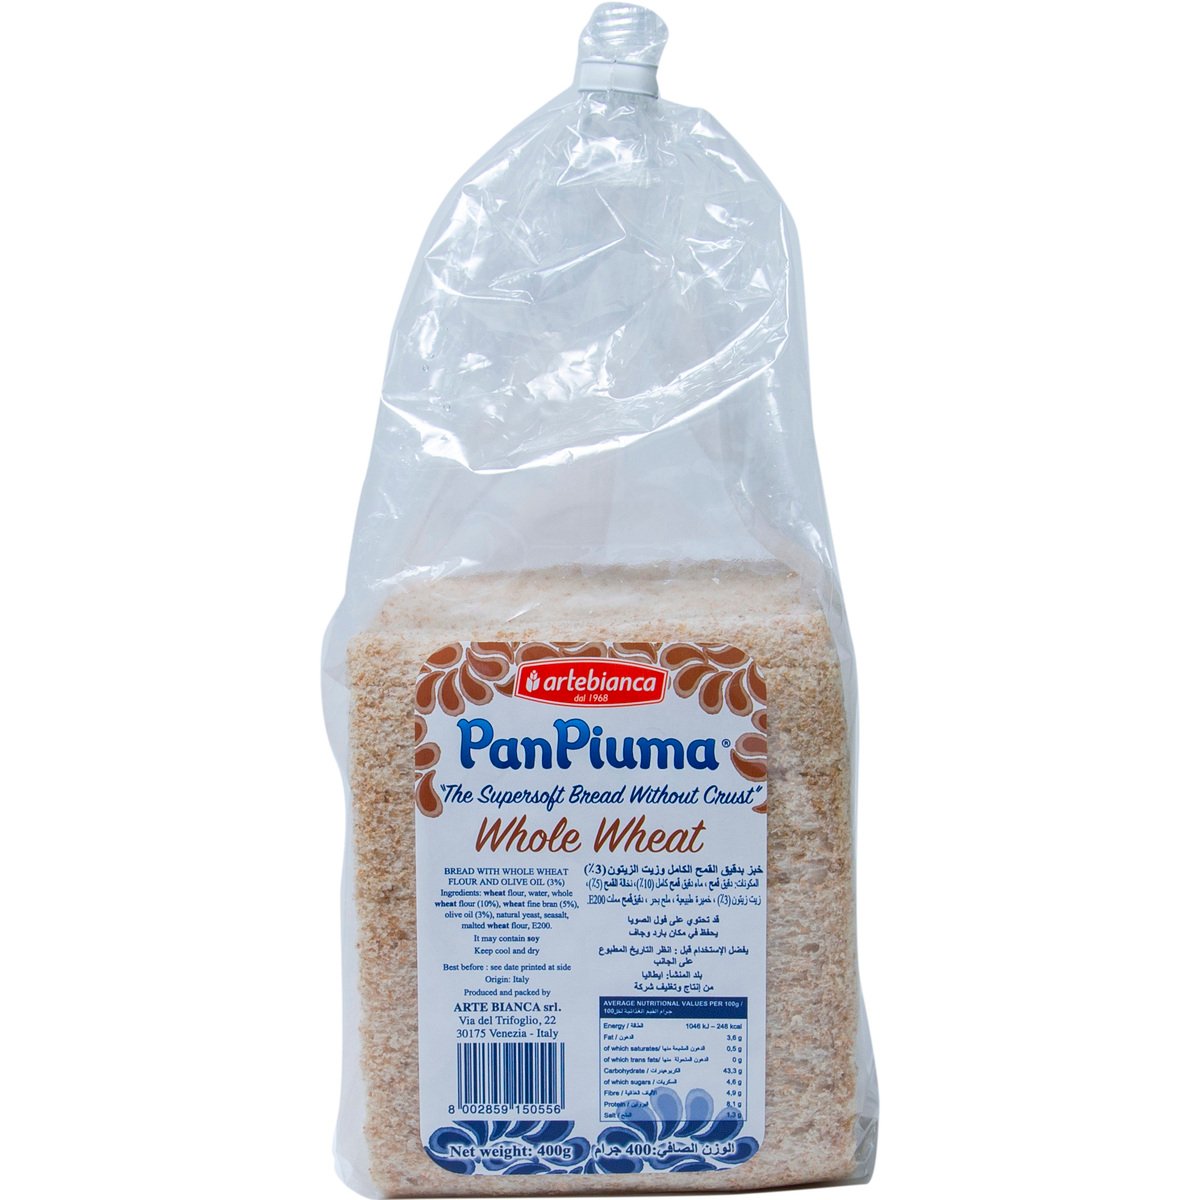 Pan Piuma The Super Soft Bread Without Crust Whole Wheat 1 pkt